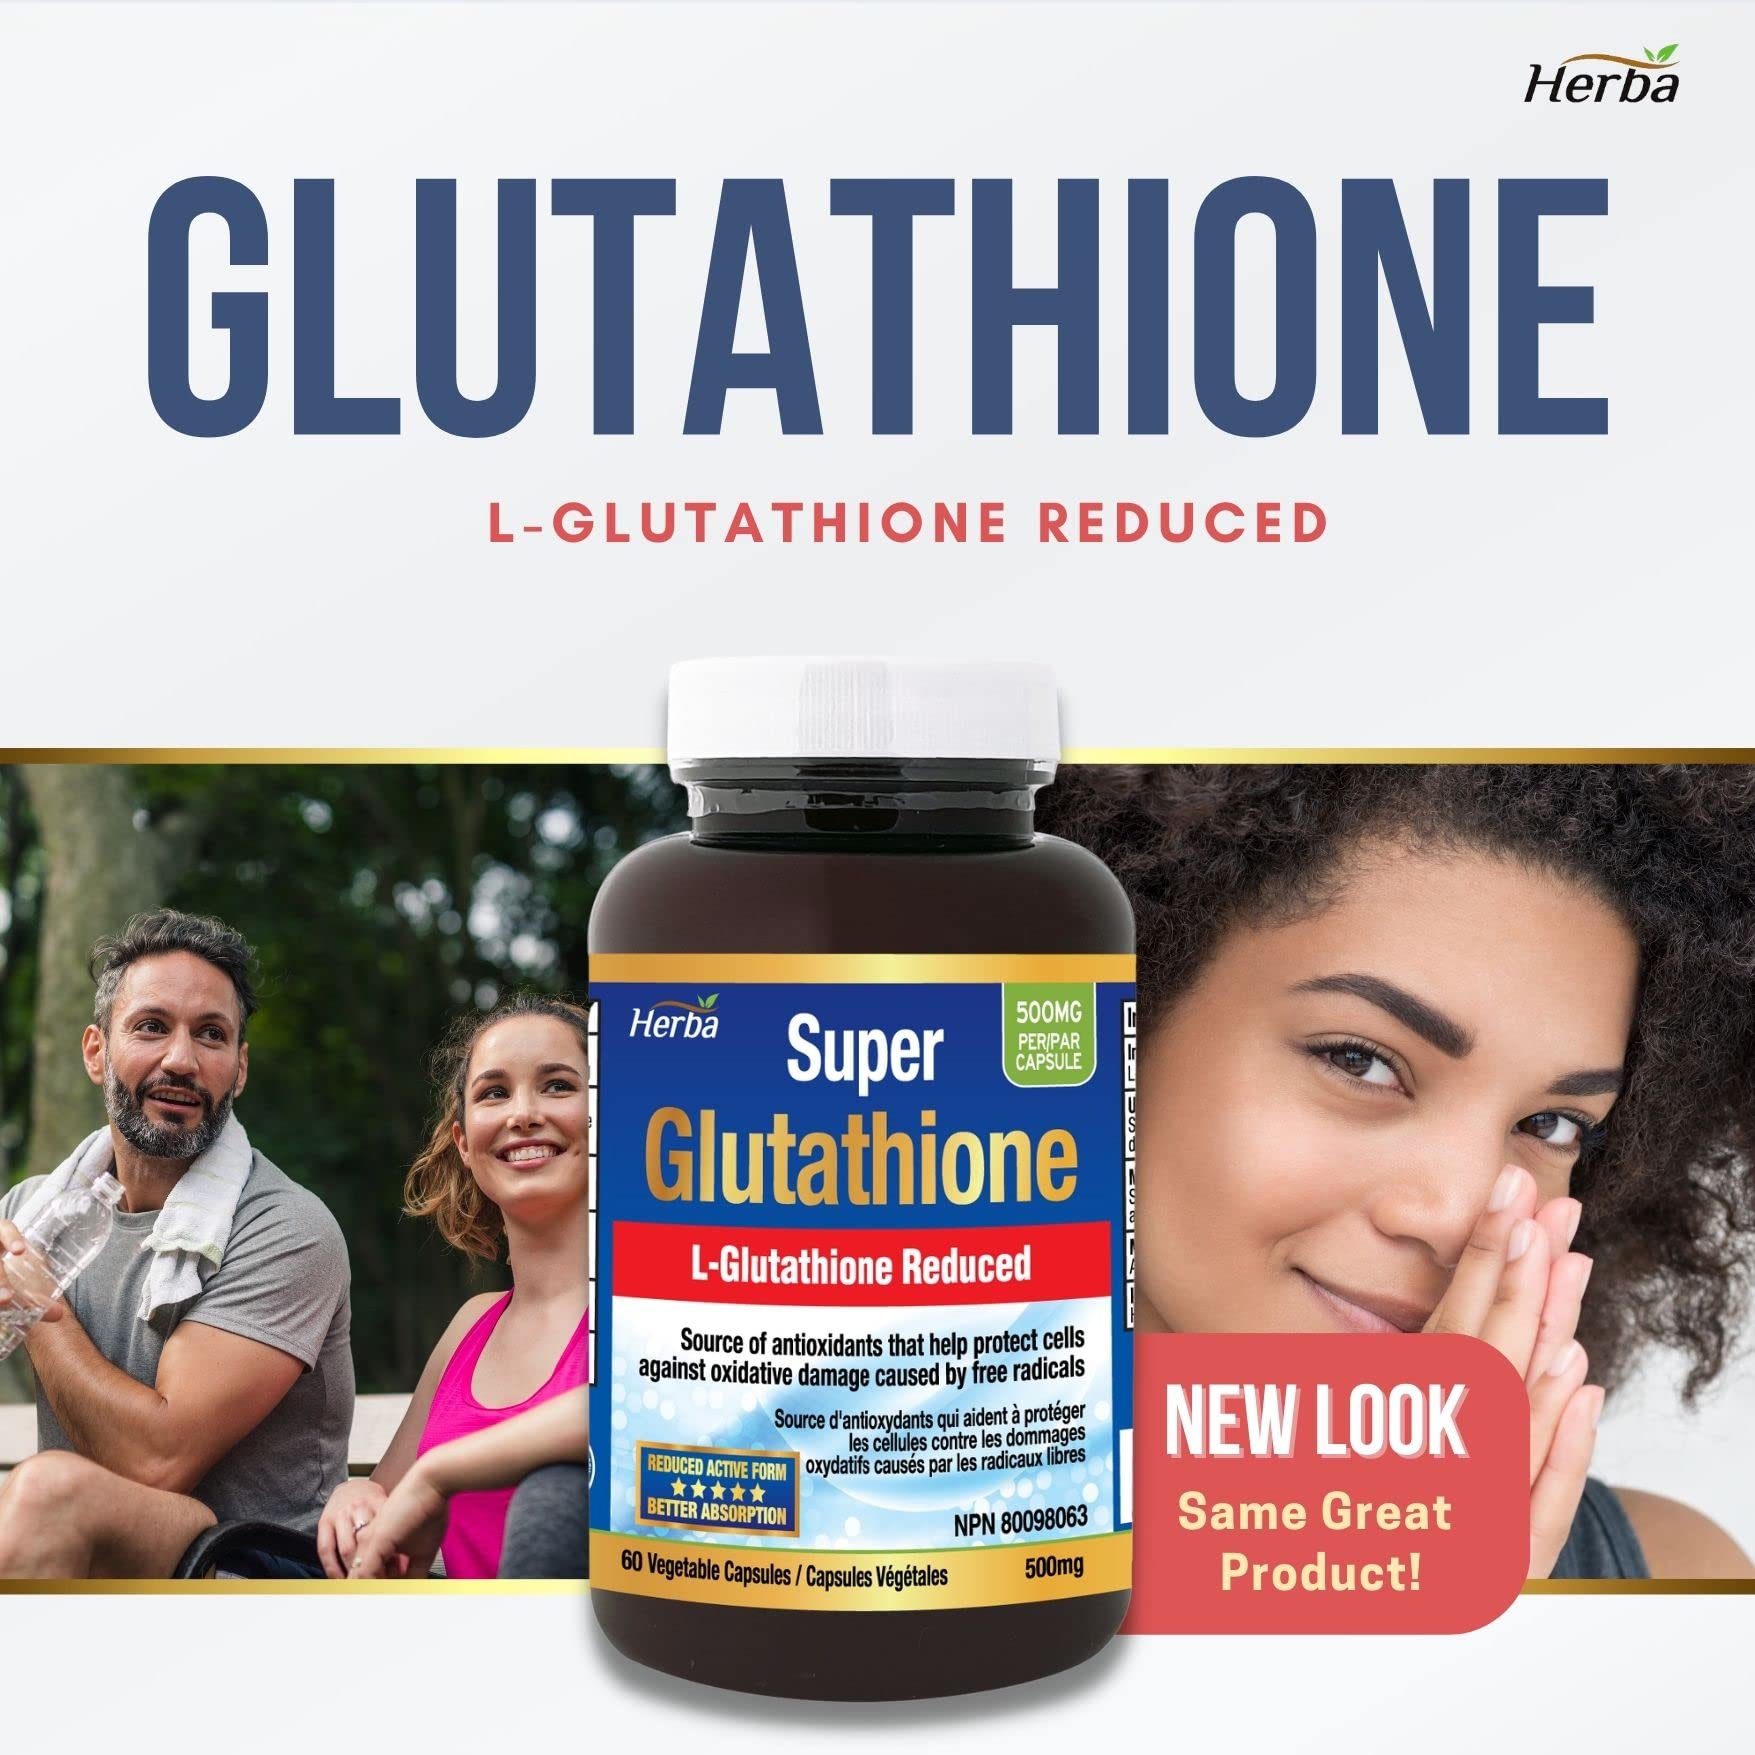 Herba Glutathione Supplements 500mg, 60 Vegetable Capsules-L-Glutathione Reduced Active Form